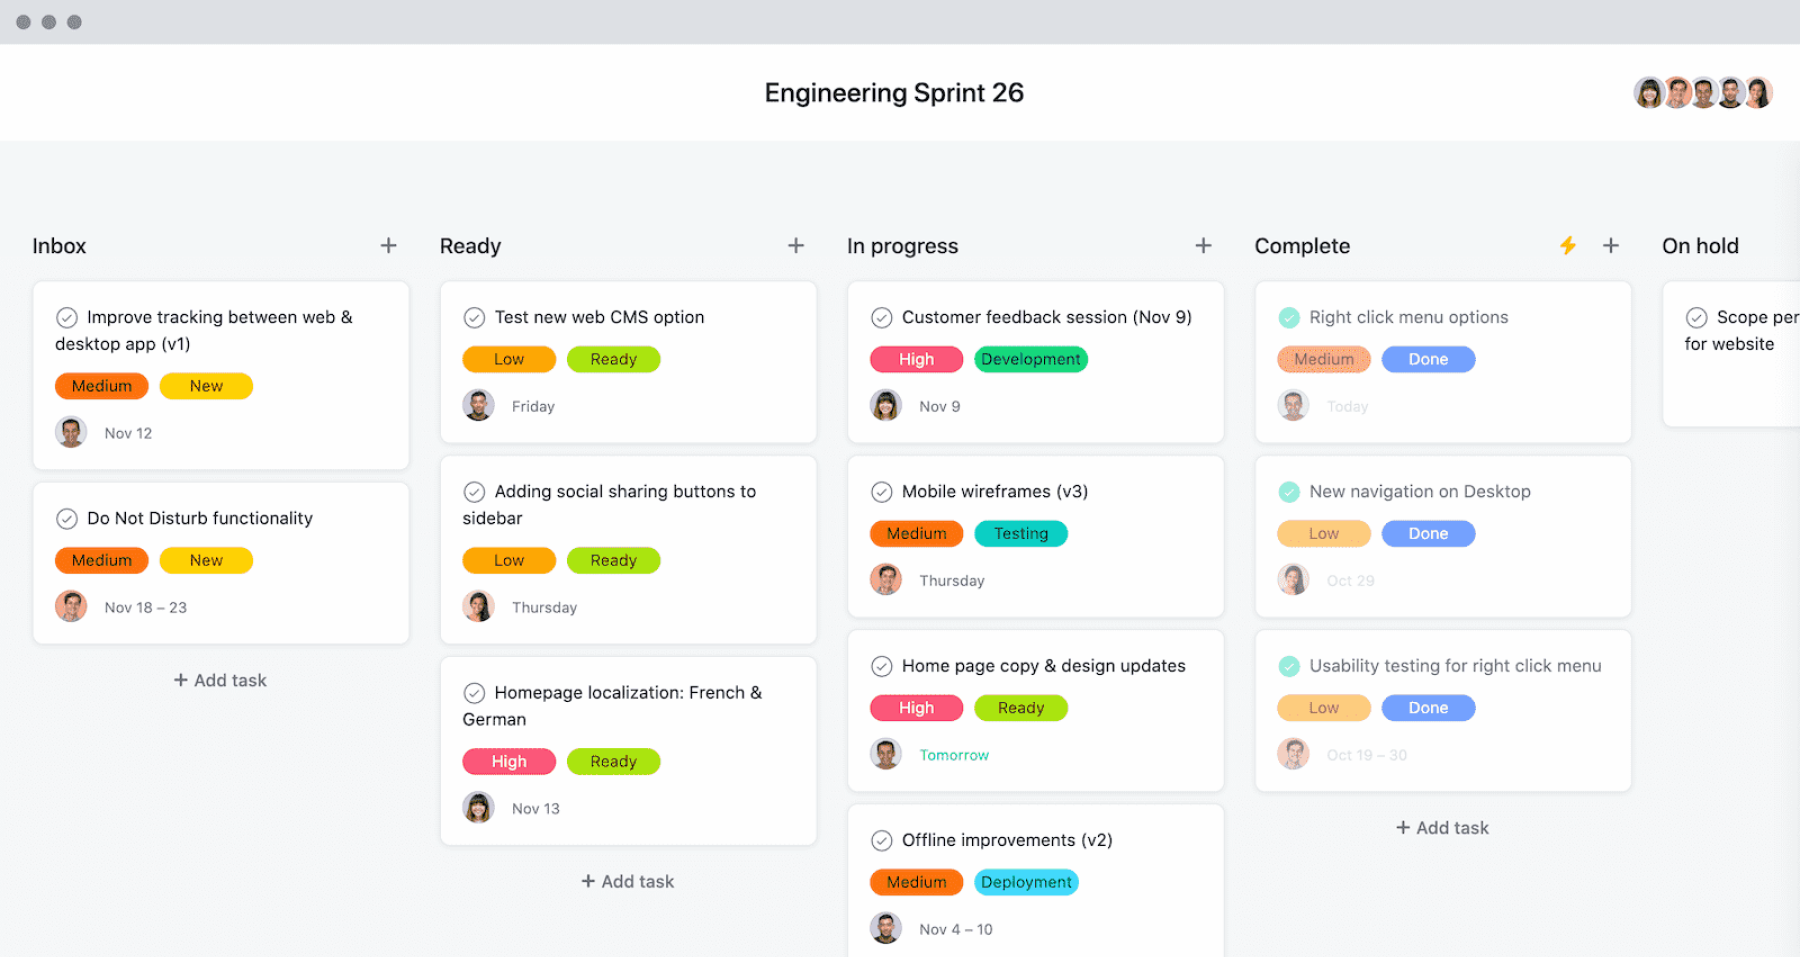 [Product UI] Engineering Sprint Kanban Board for Scrum in Asana (Boards)